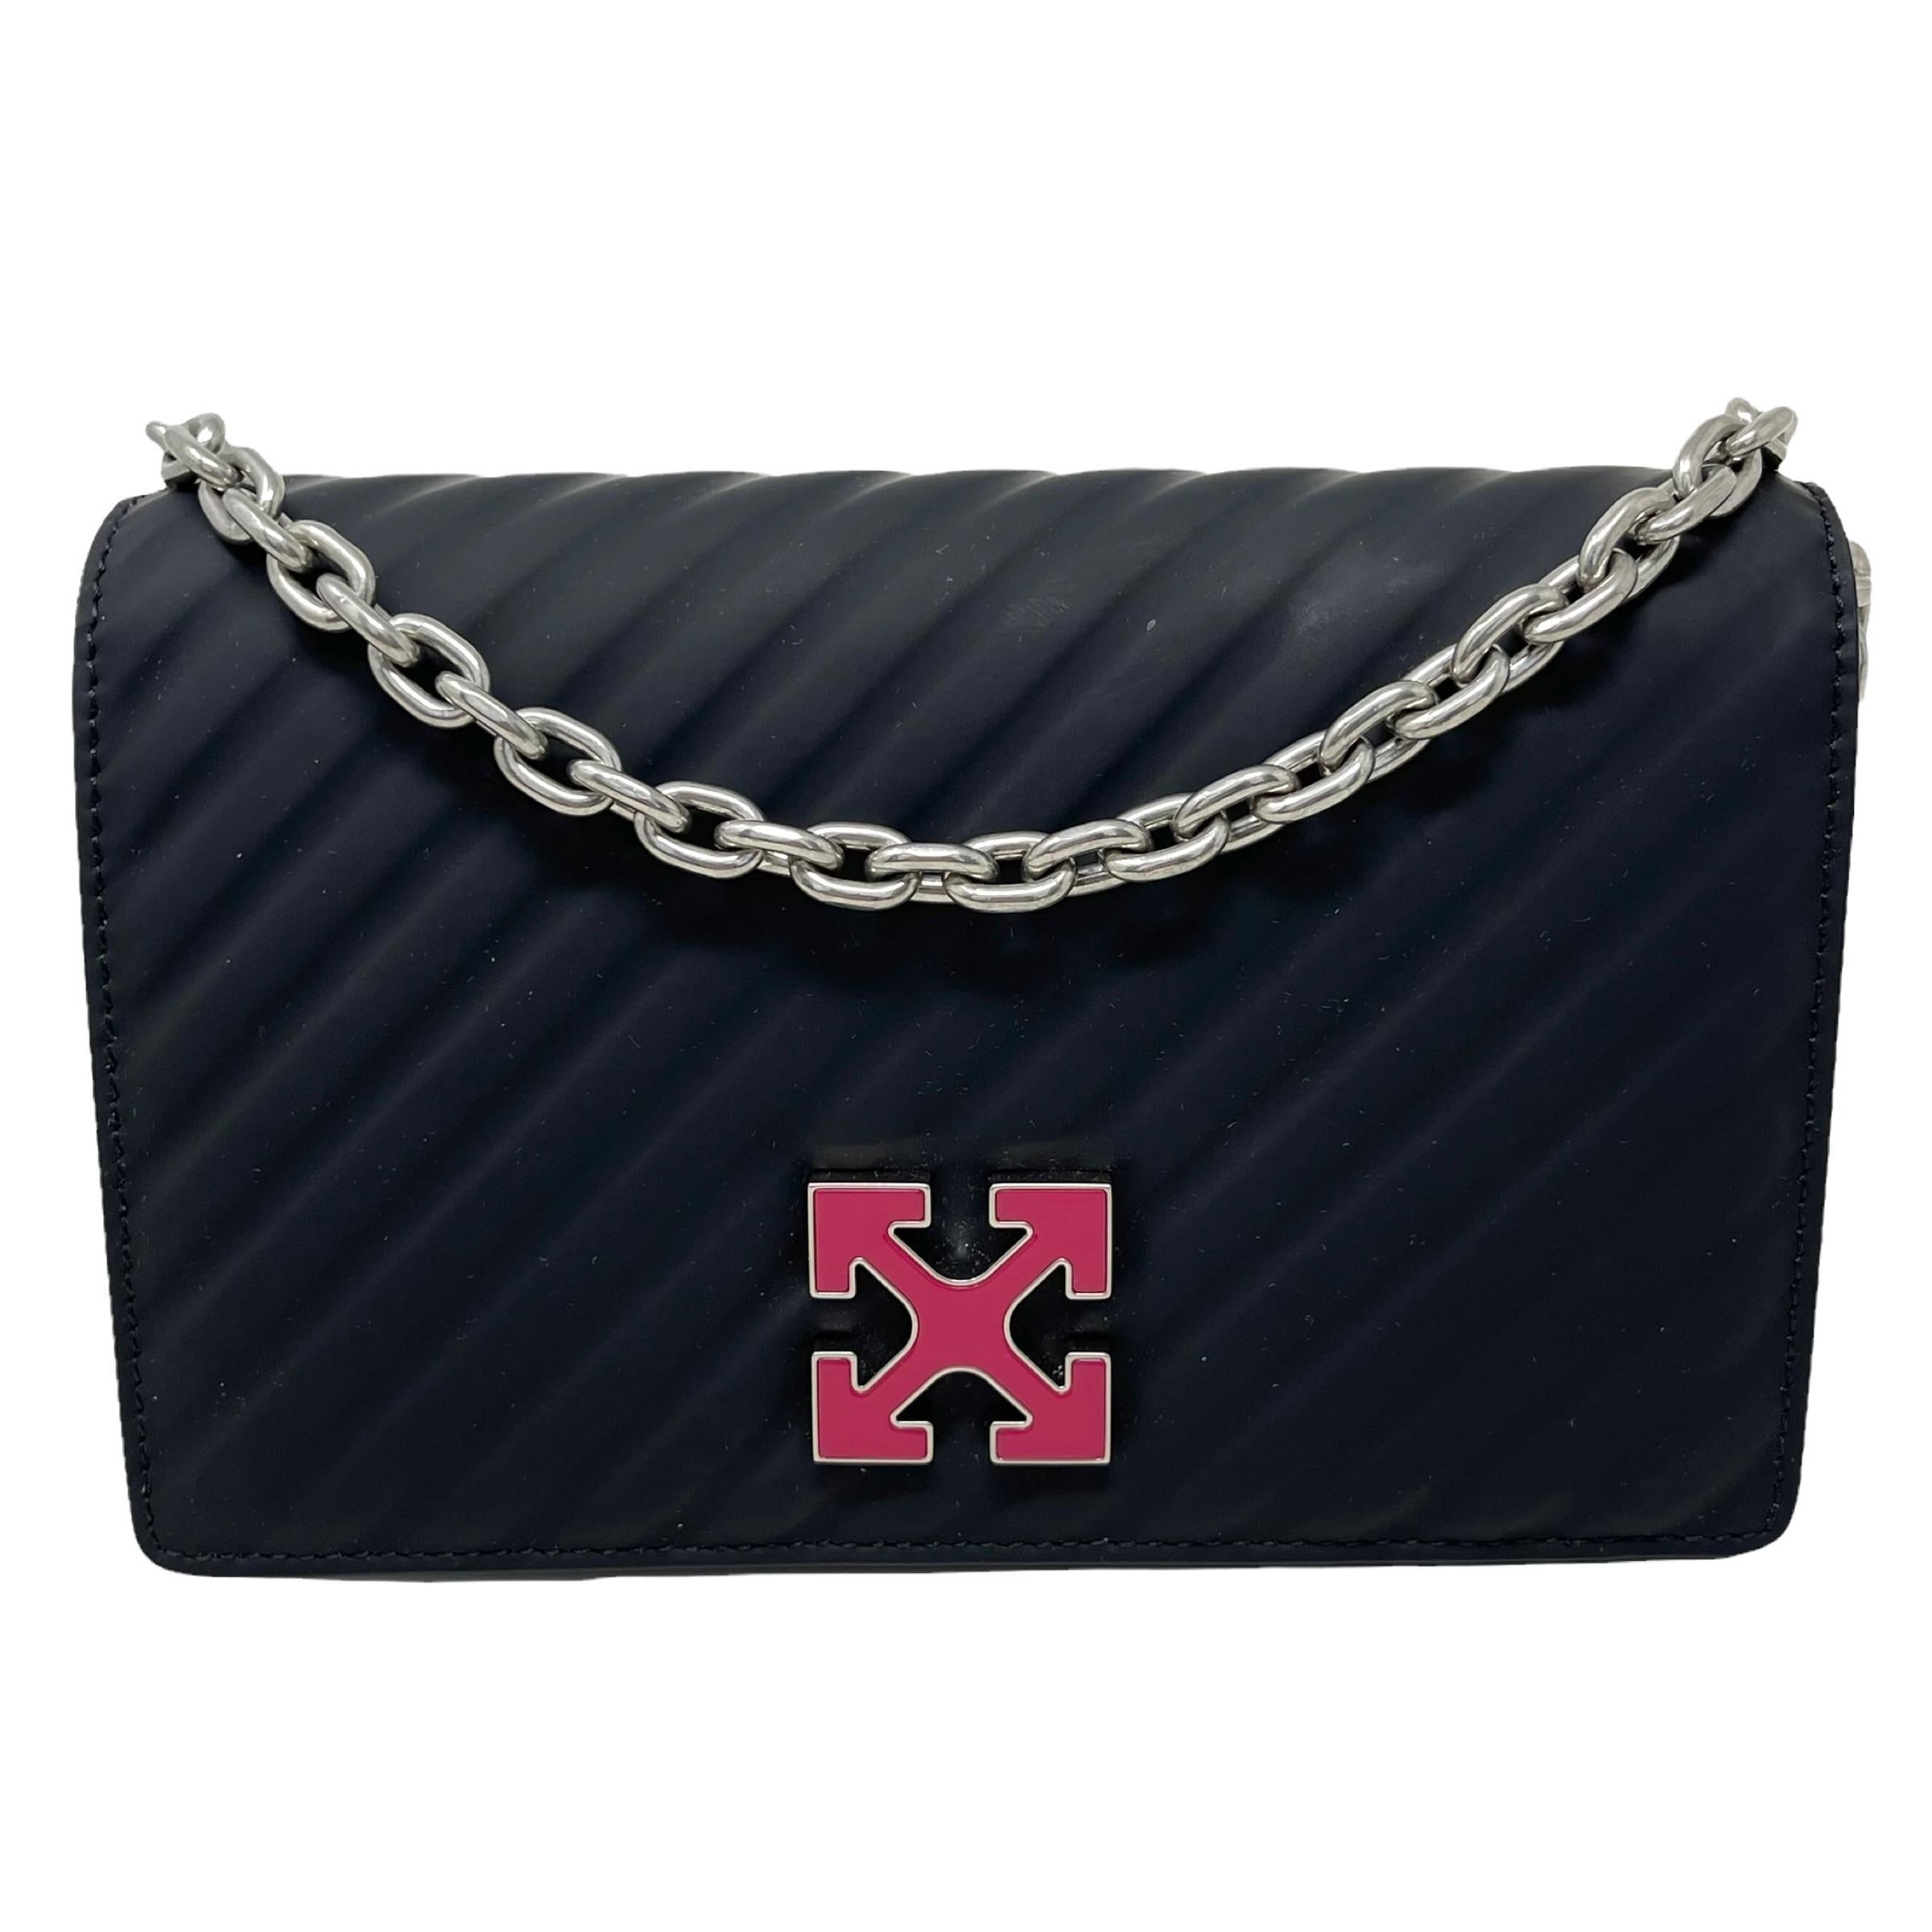 New Off-White Virgil Abloh Black Jitney 0.5 Arrow Logo Leather Crossbody Bag

Authenticity Guaranteed

DETAILS
Brand: Off-White Virgil Abloh
Gender: Women
Category: Crossbody bag
Condition: Brand new
Color: Black
Material: Leather
Arrow